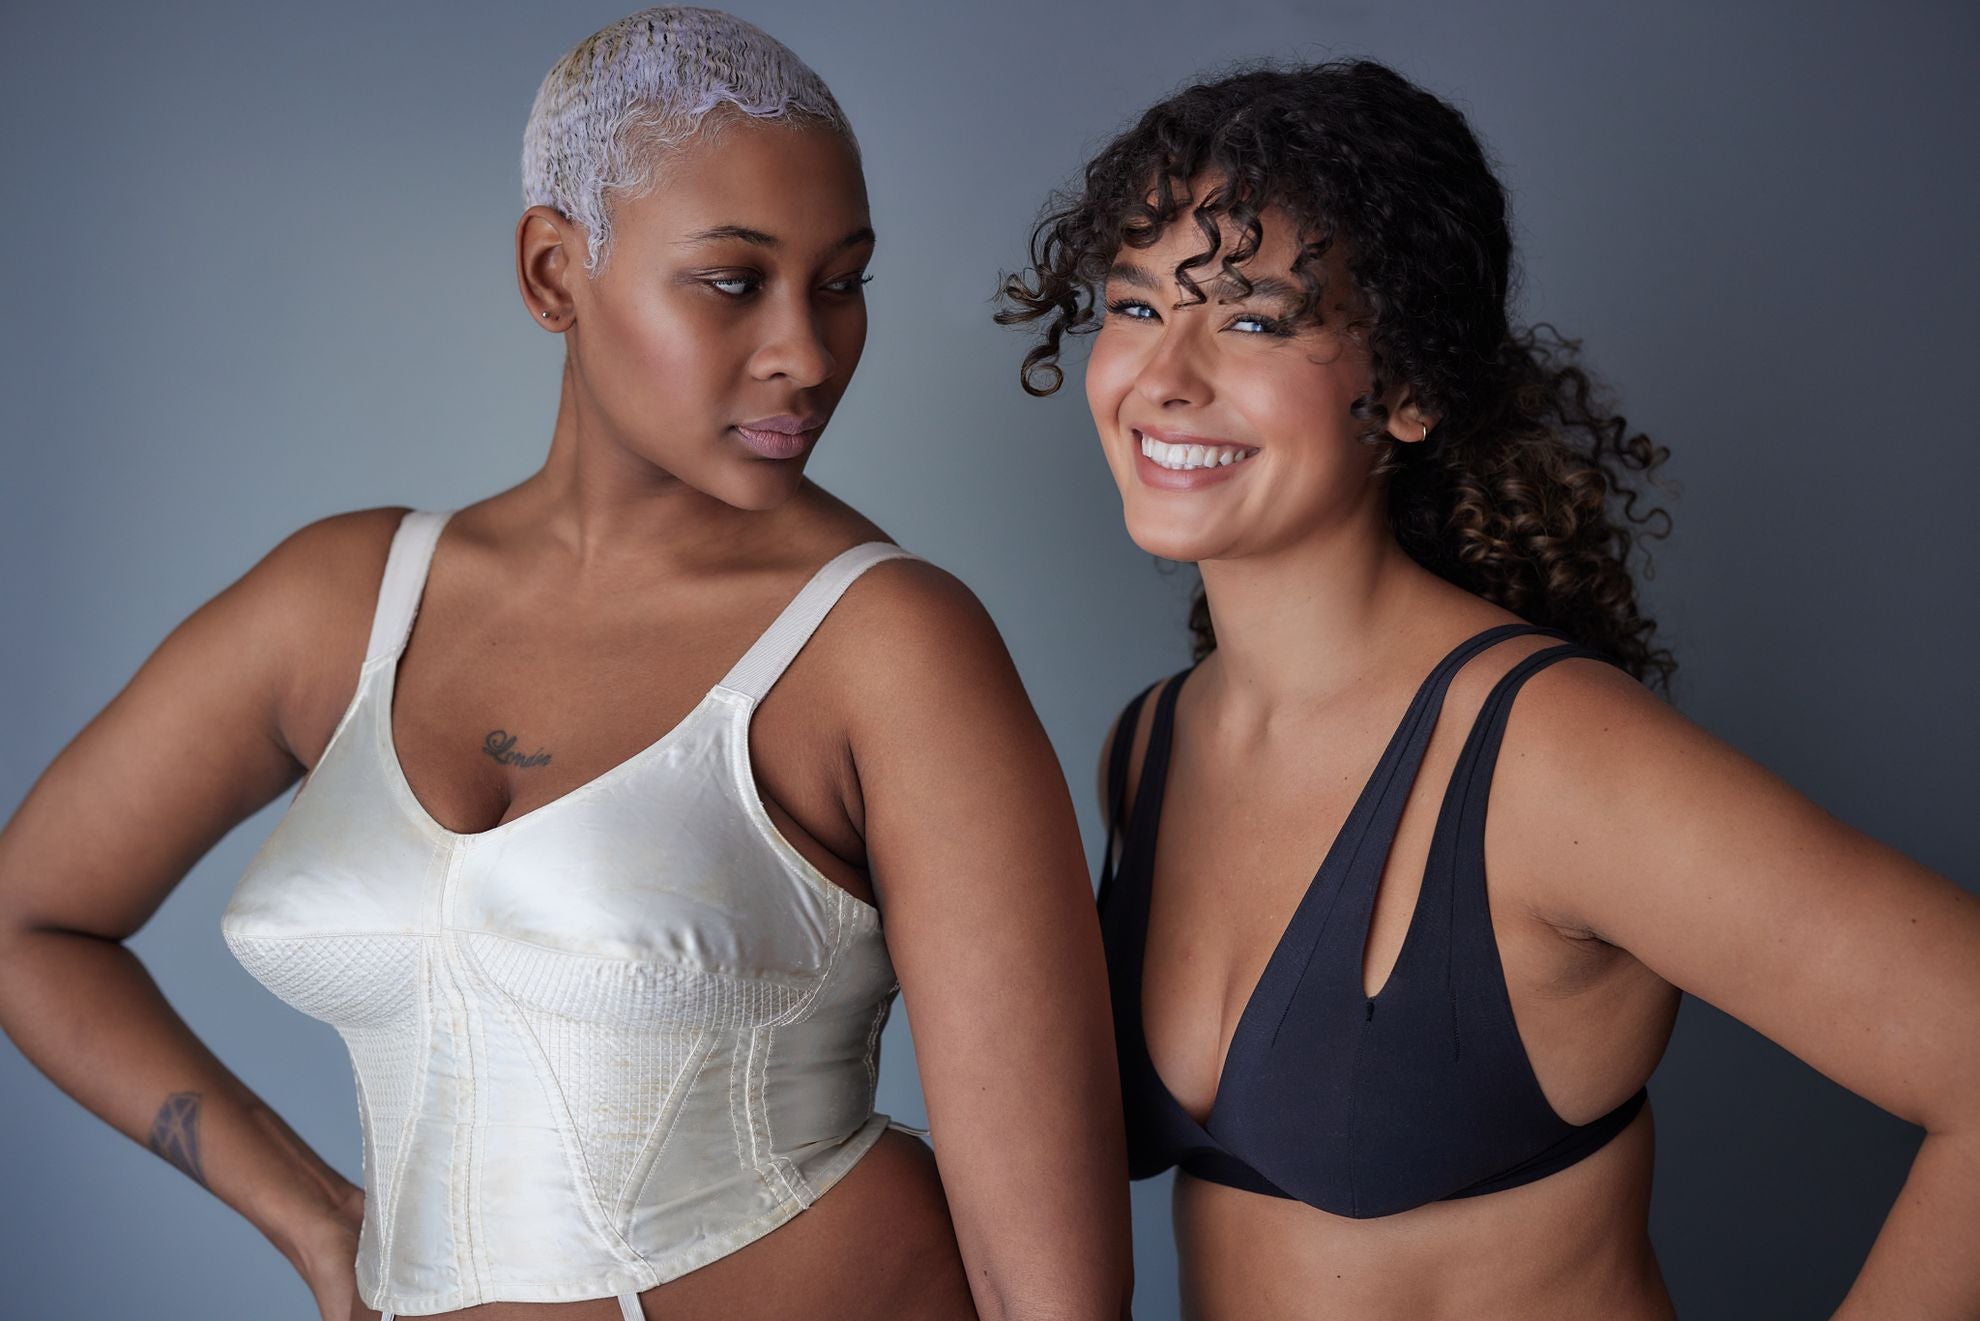 The One and only Nuudii System - the option between bras and